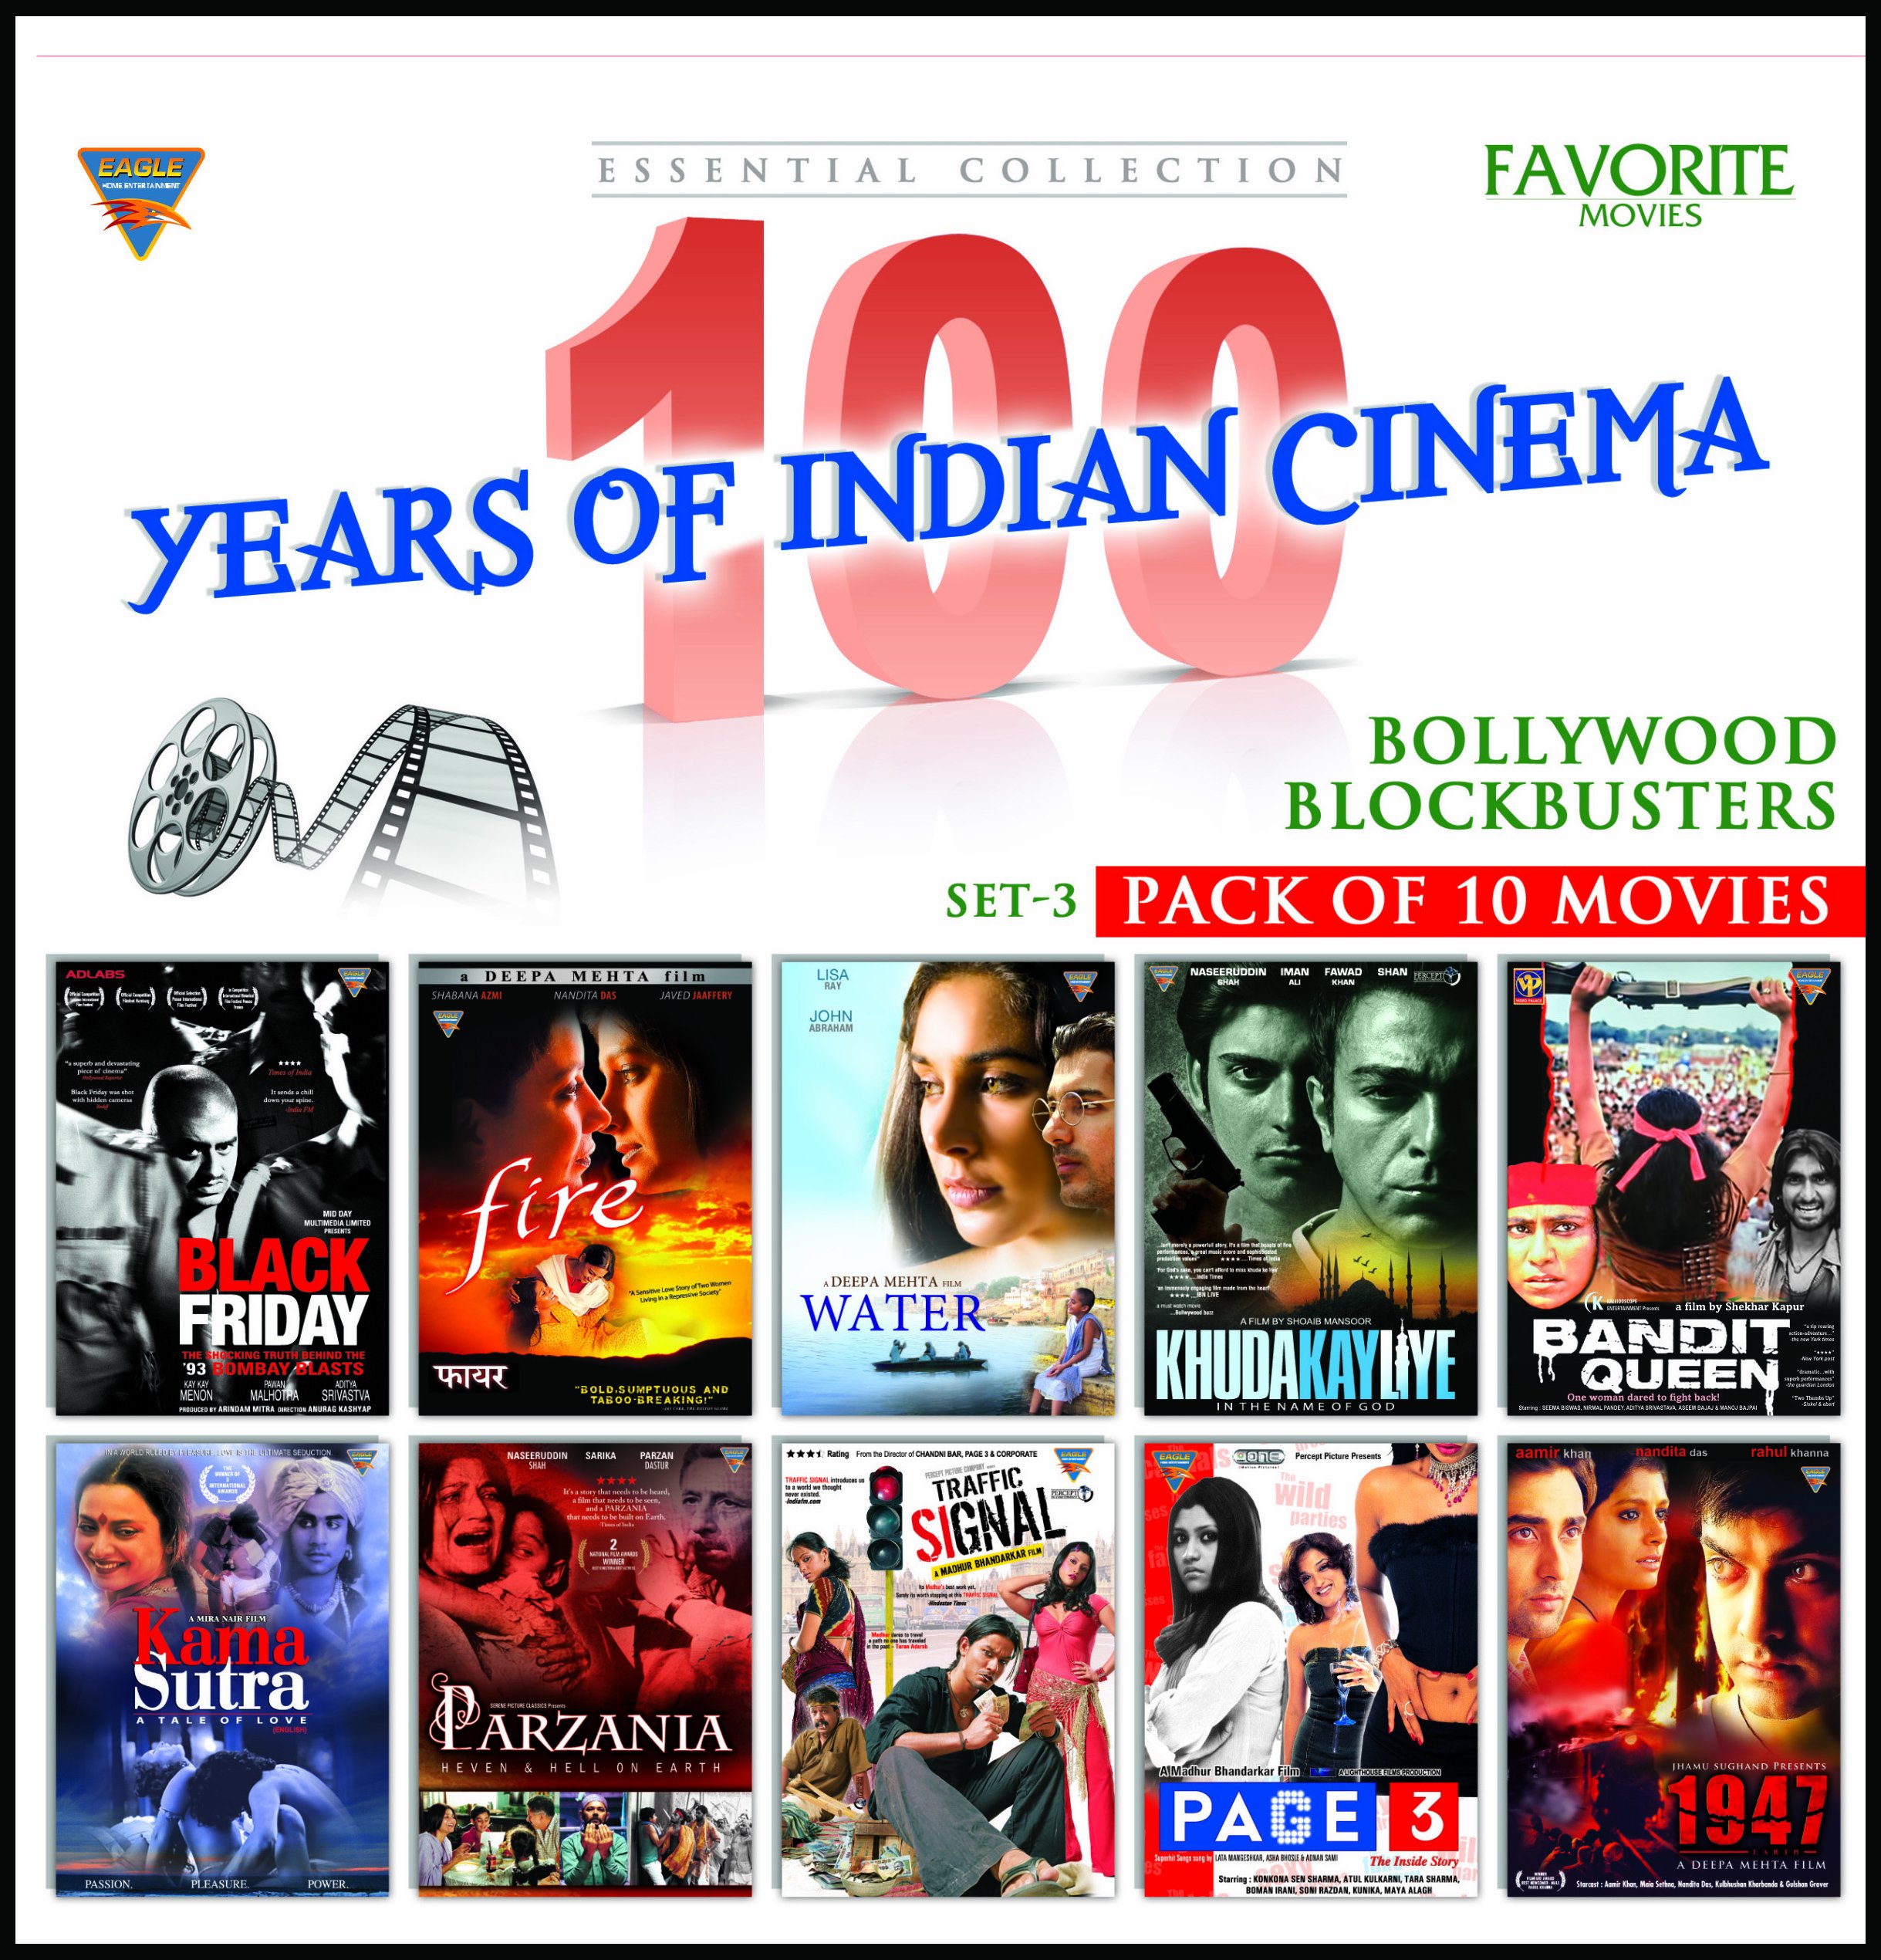 100-years-of-indian-cinema-set-3-movie-purchase-or-watch-online